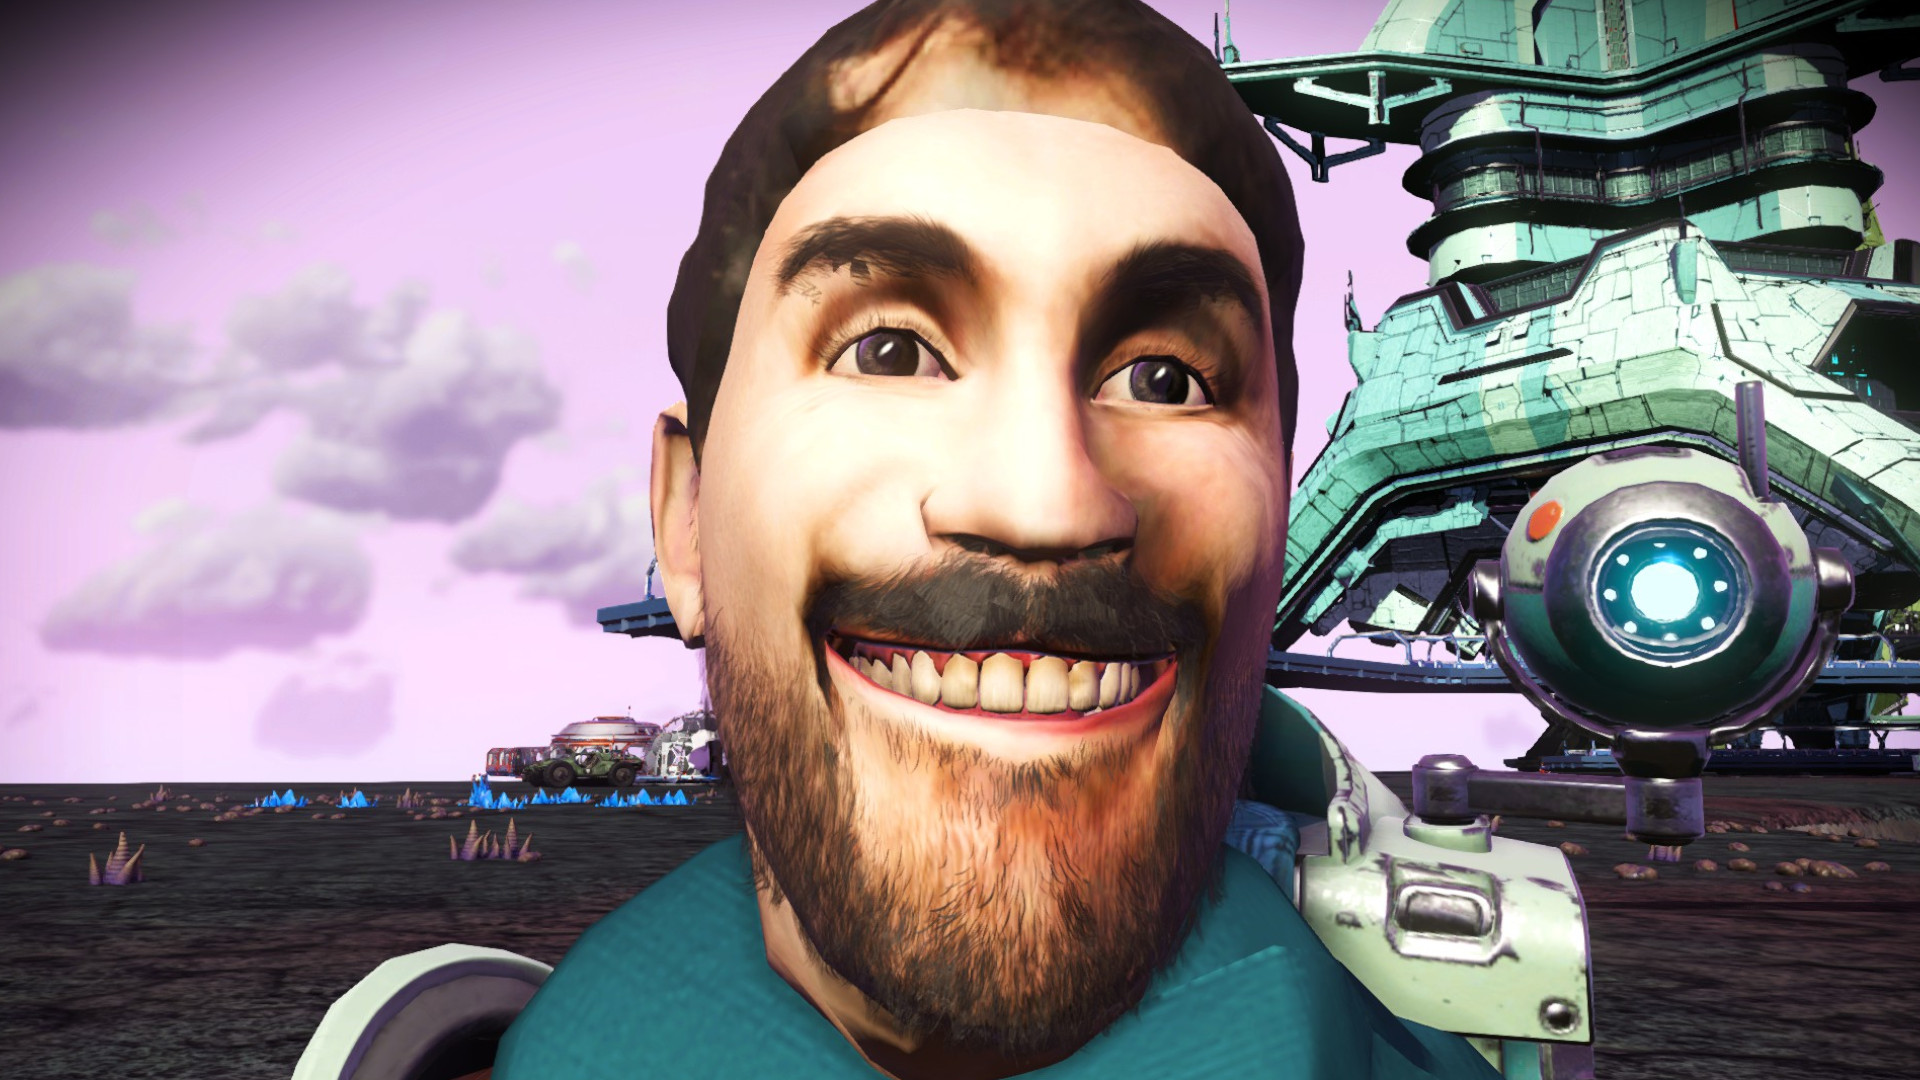 No Man’s Sky creator says please don’t use this mod that puts his face in the game